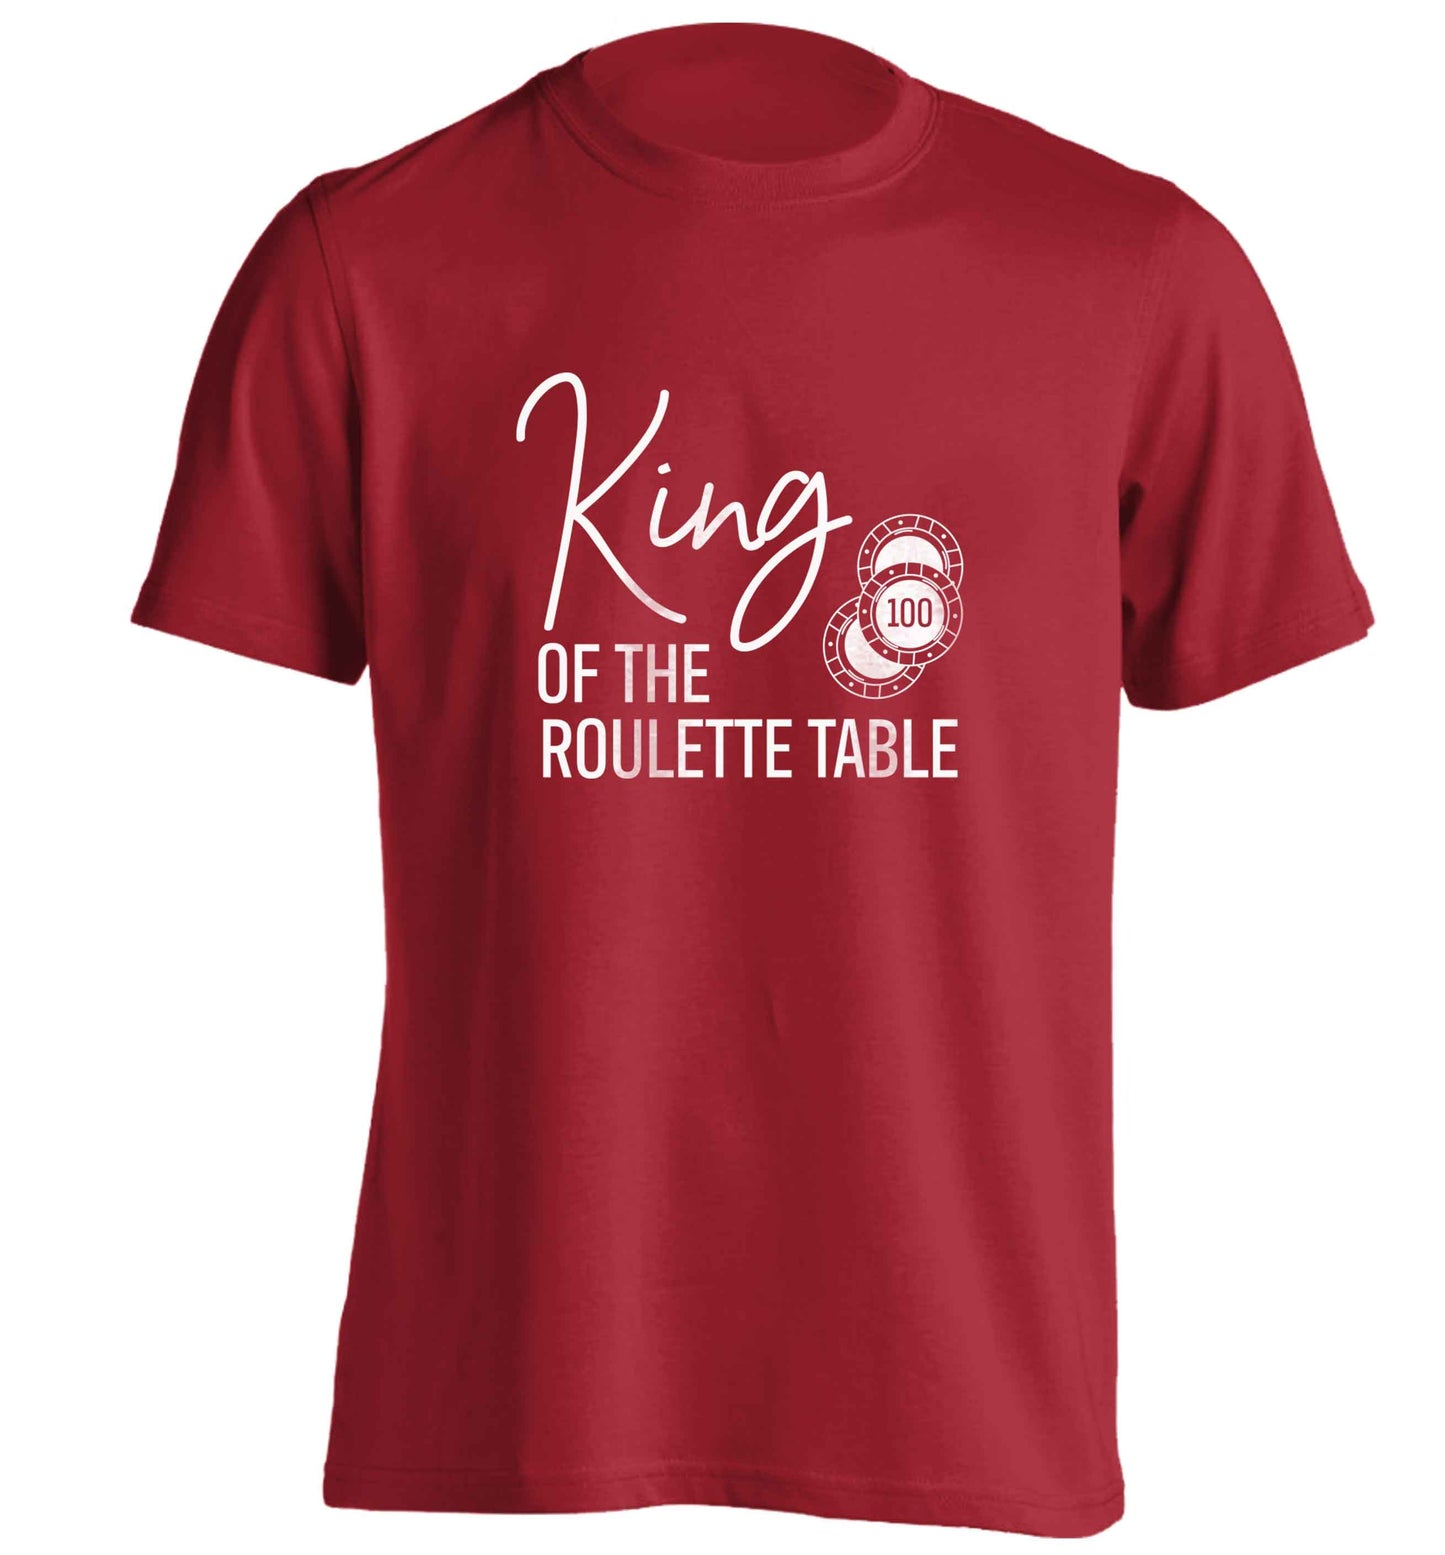 King of the roulette table adults unisex red Tshirt 2XL